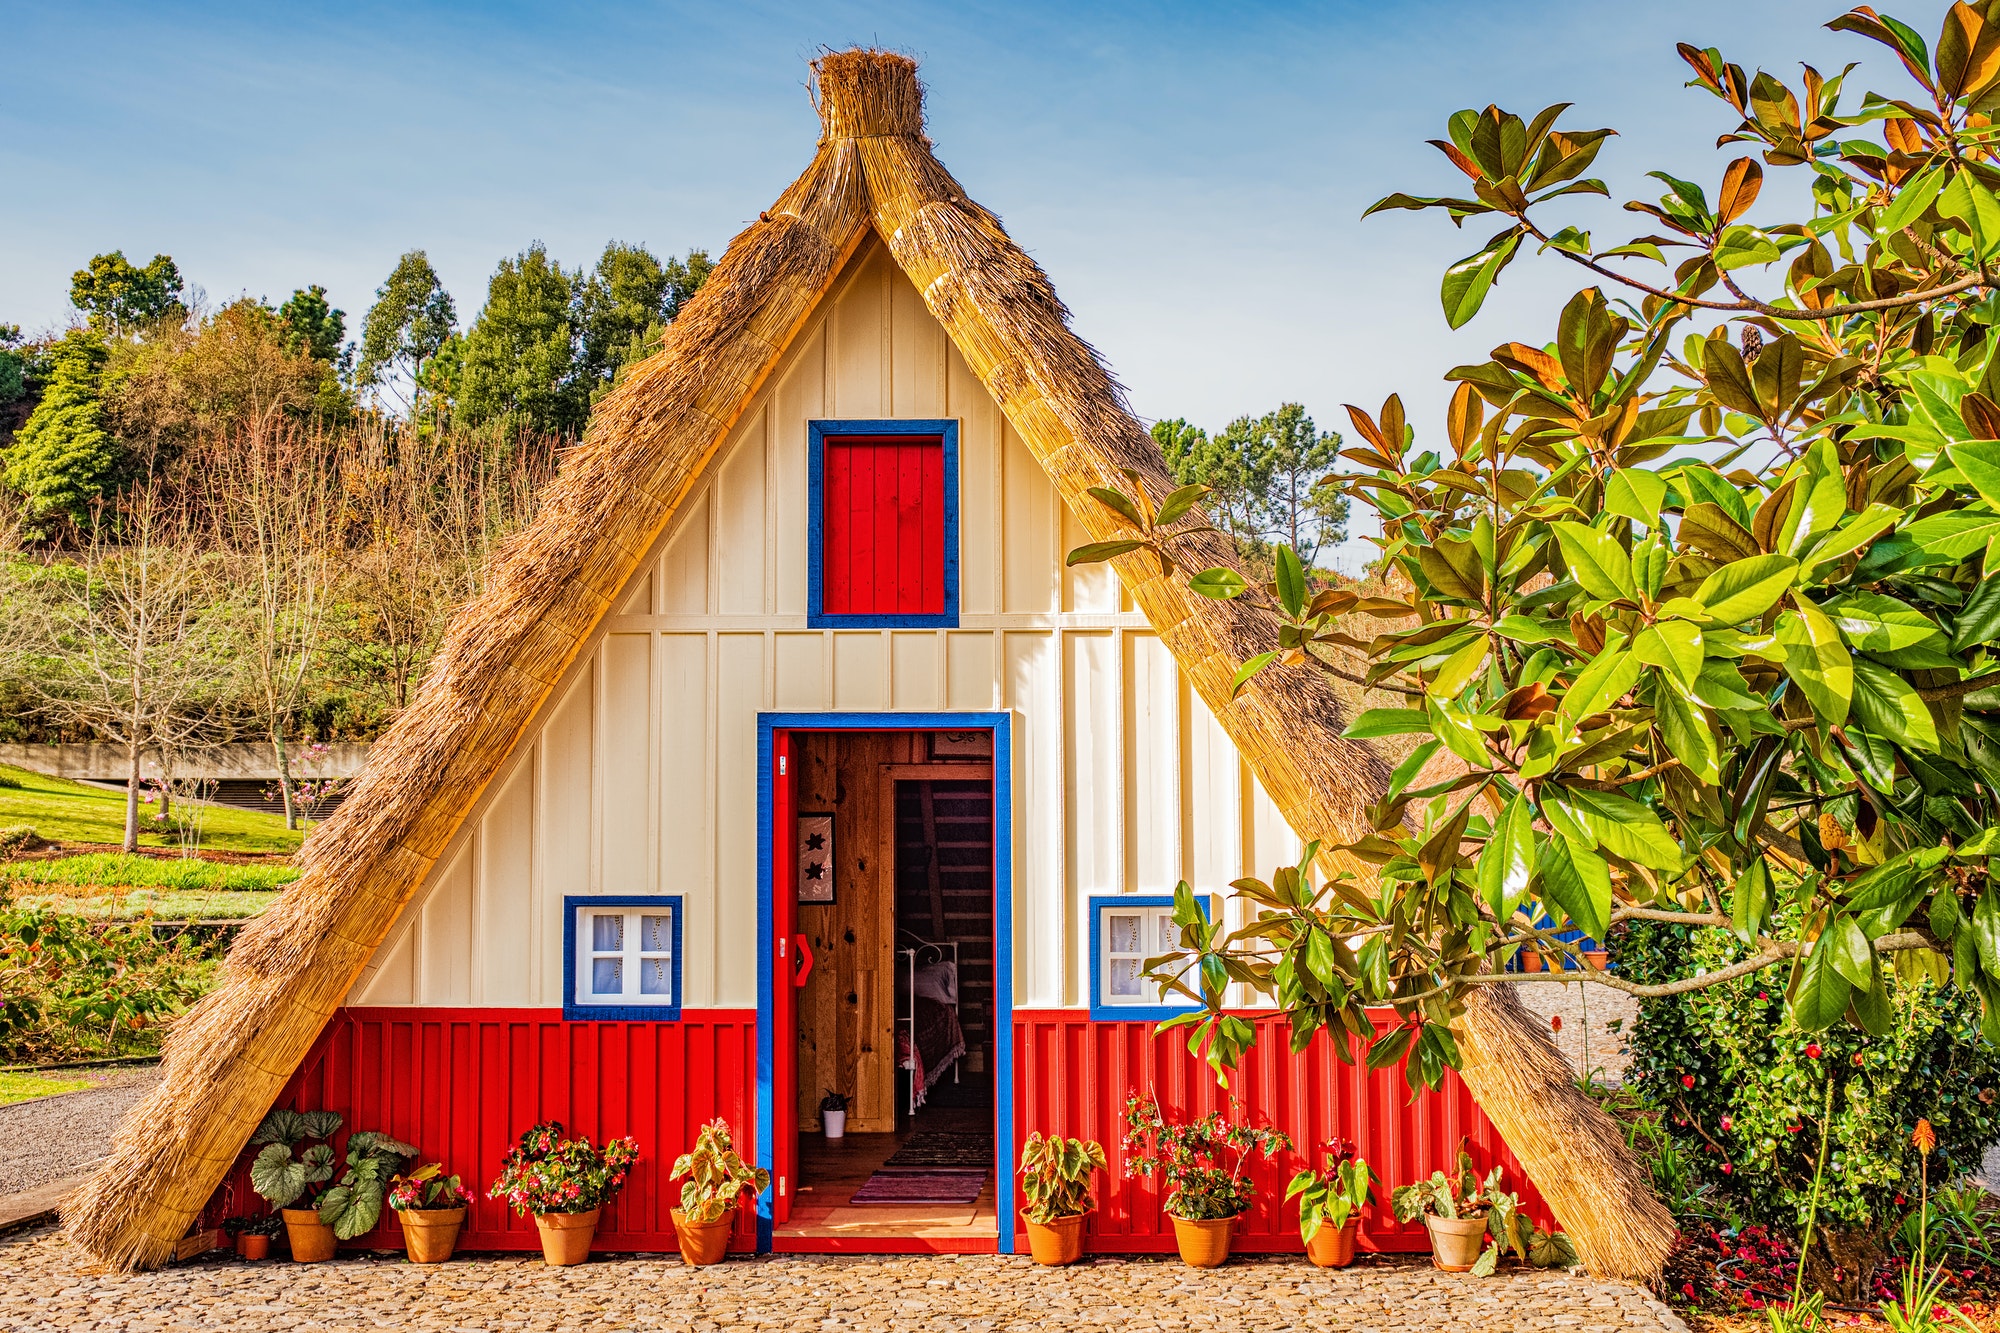 Traditionale Hütte in Portugal